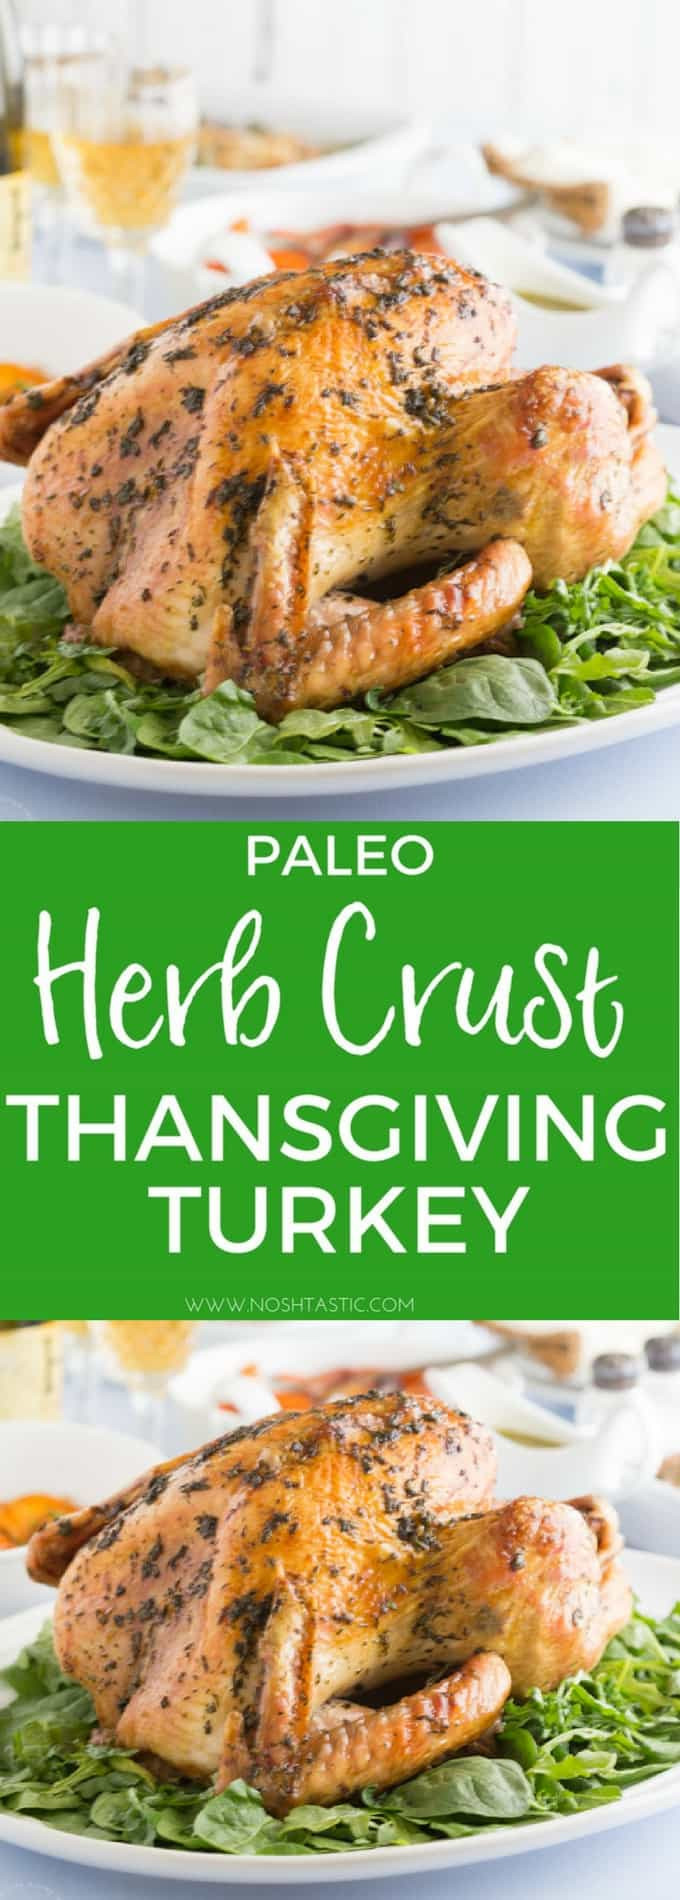 Paleo Thanksgiving Turkey
 Paleo Thanksgiving Turkey with Fresh Herb Crust